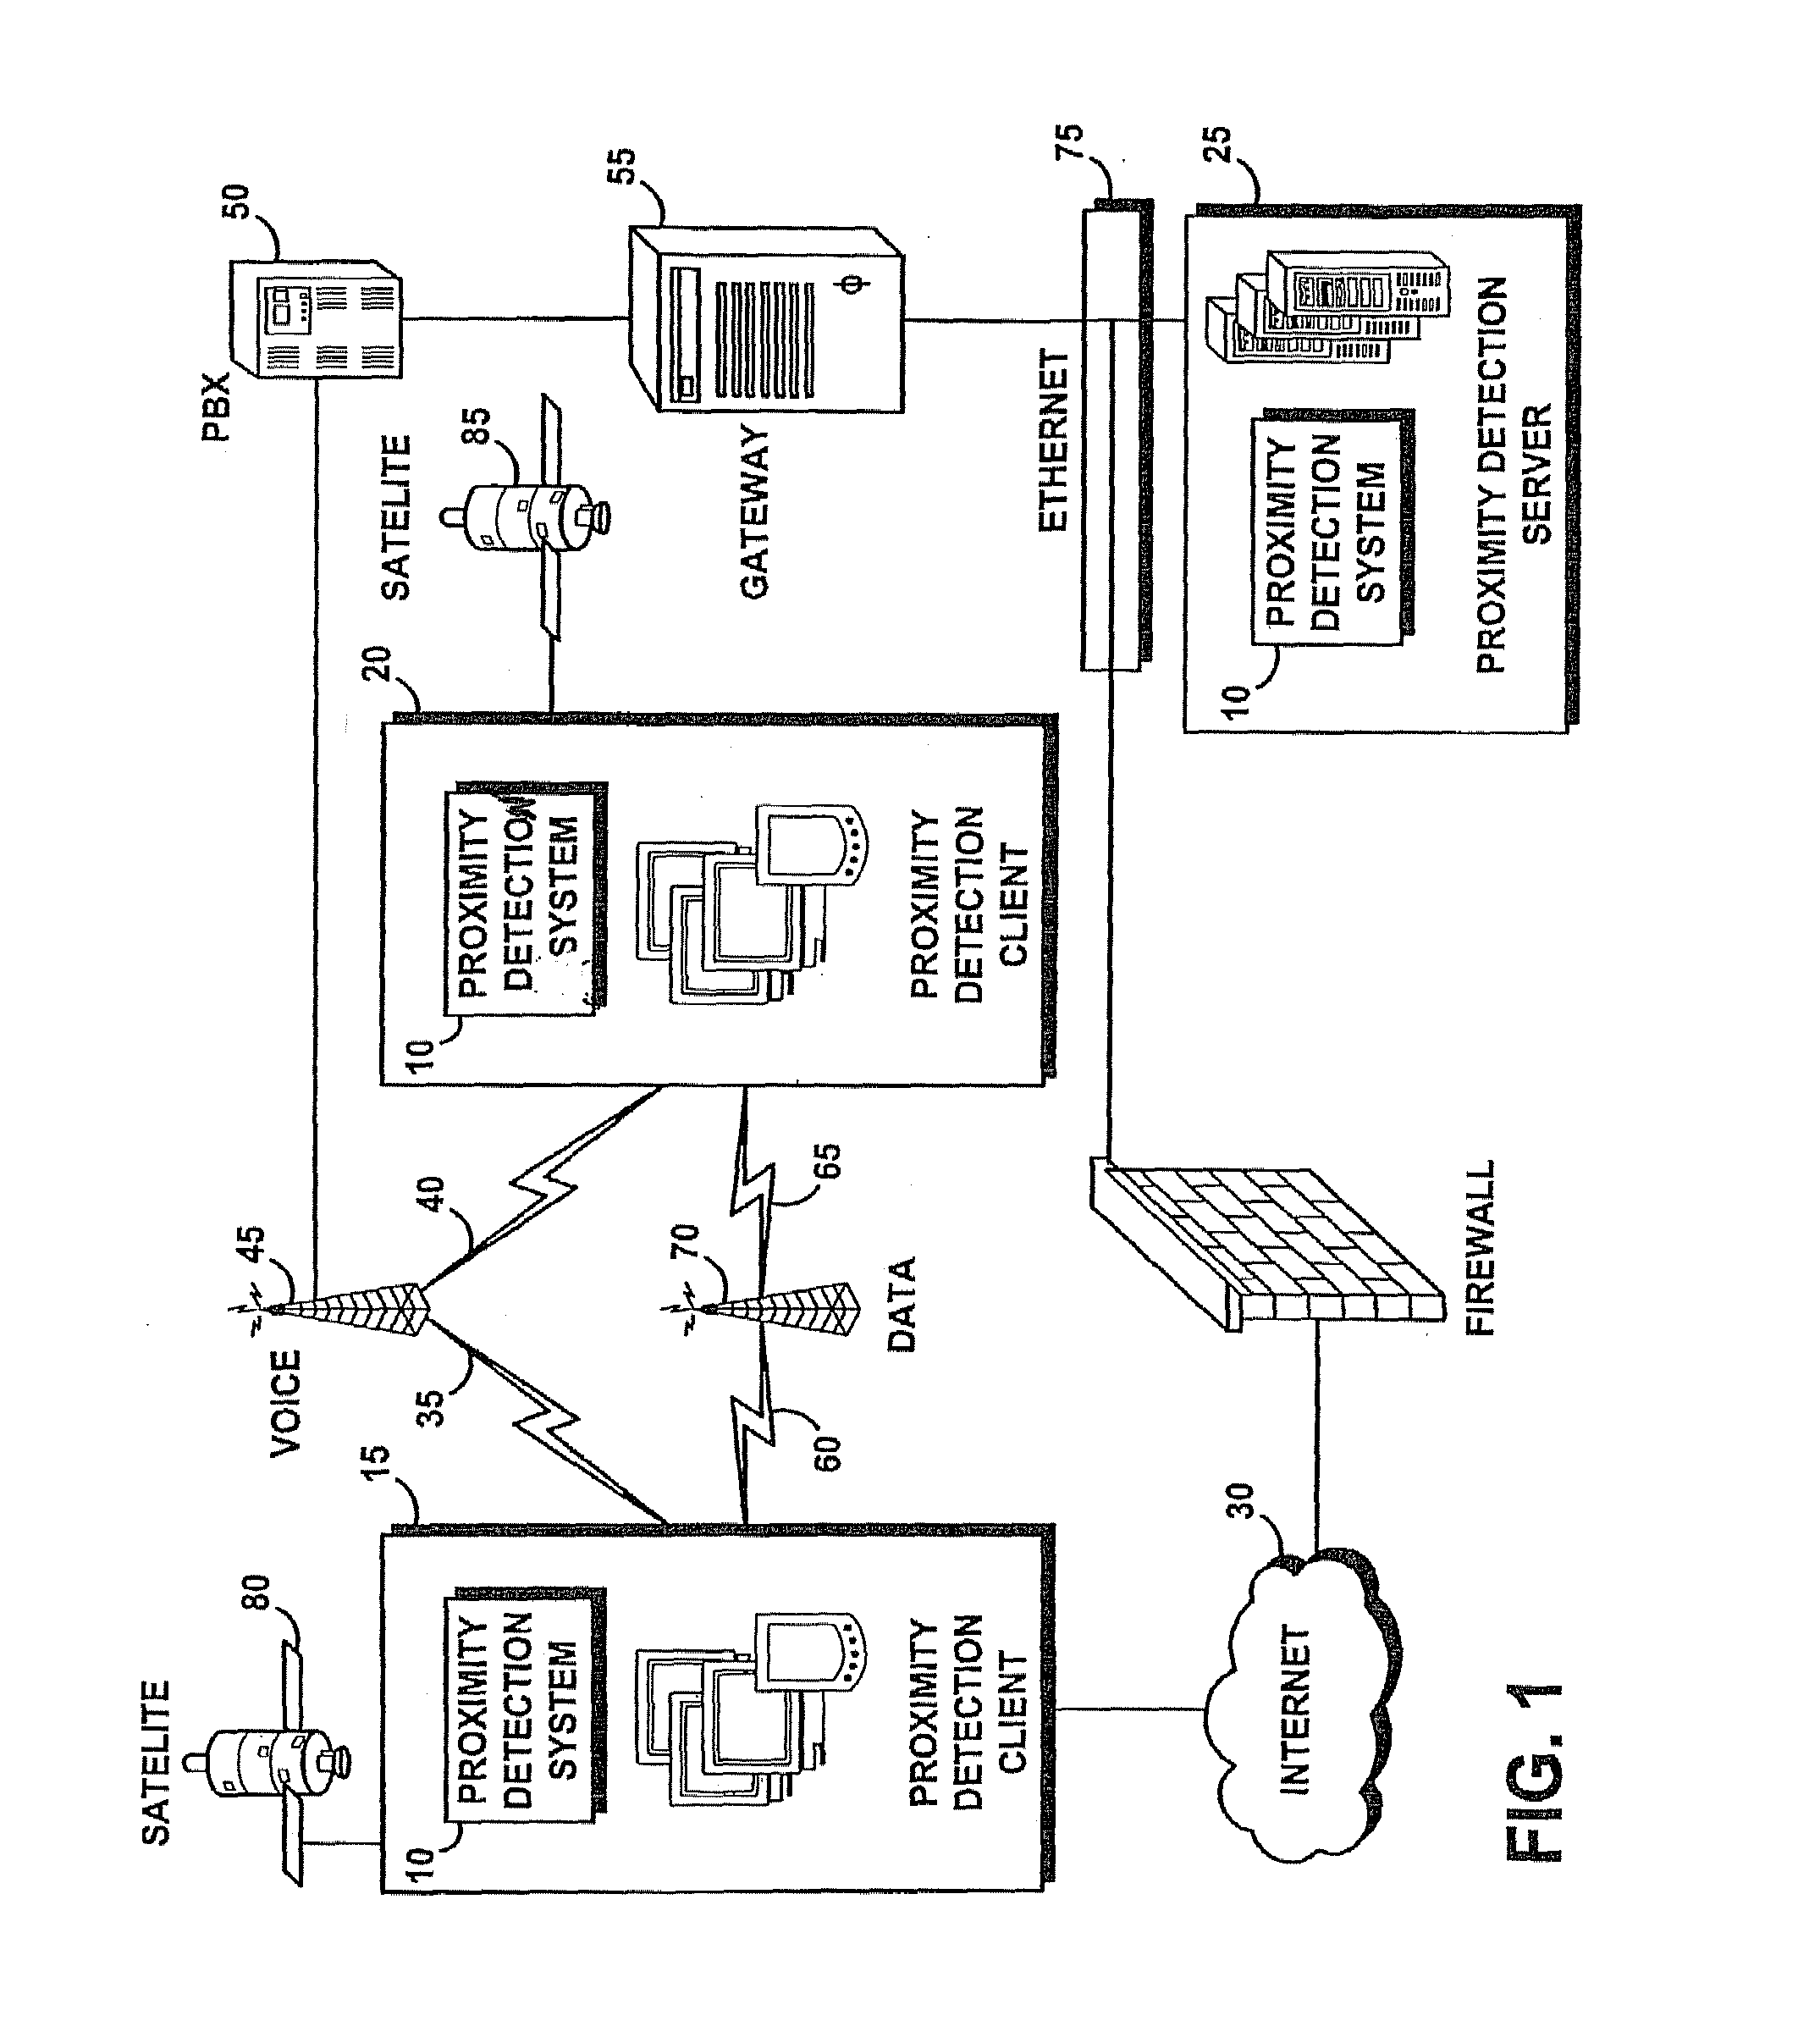 System and method for detecting proximity between mobile device users